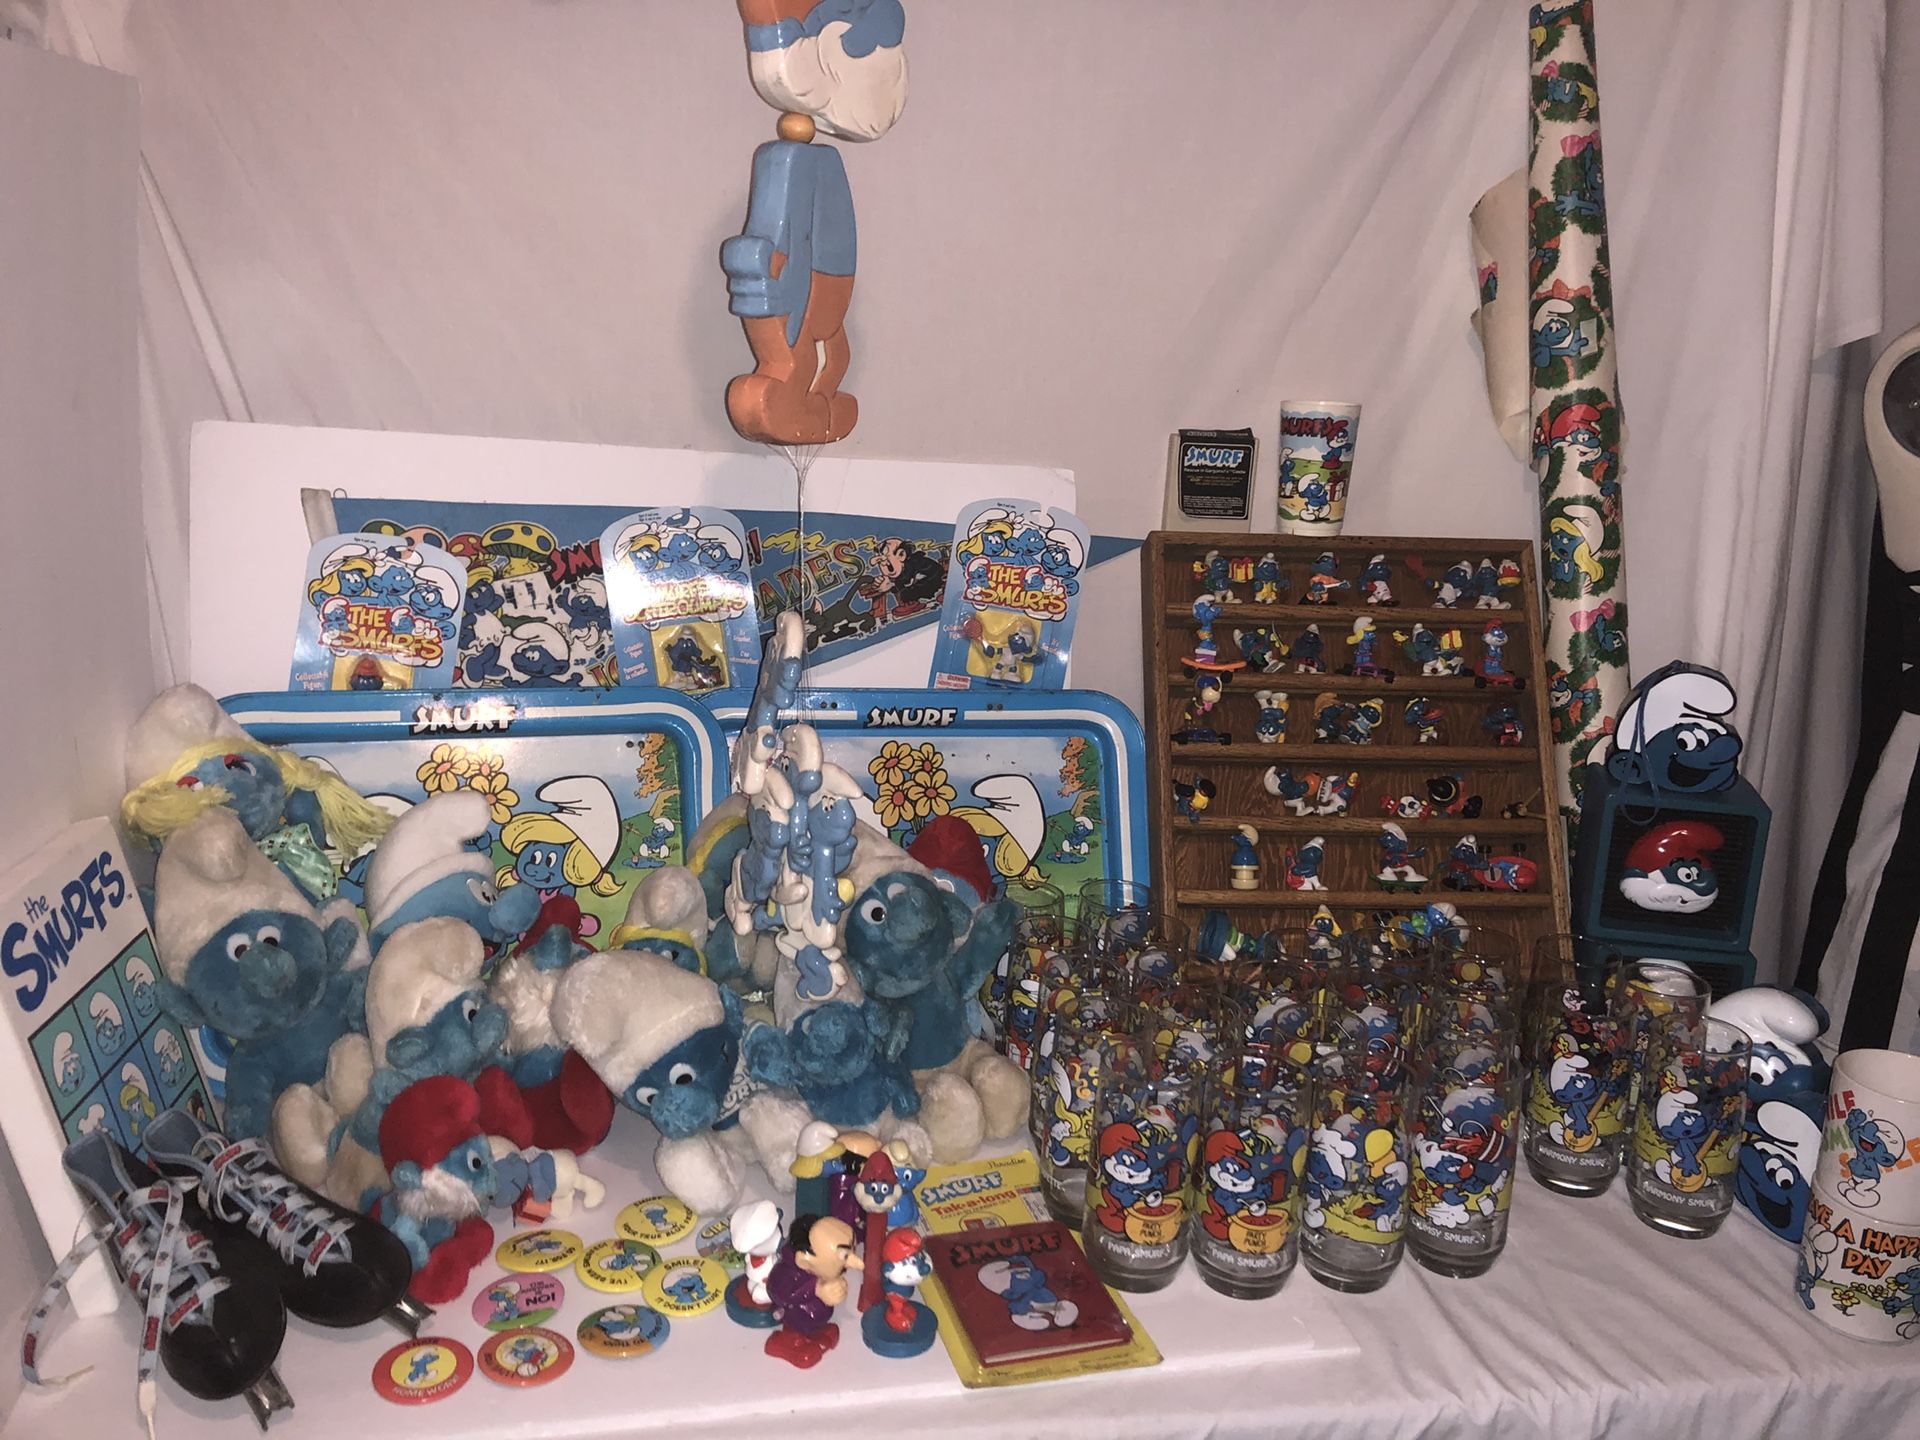 Smurf collection very cool